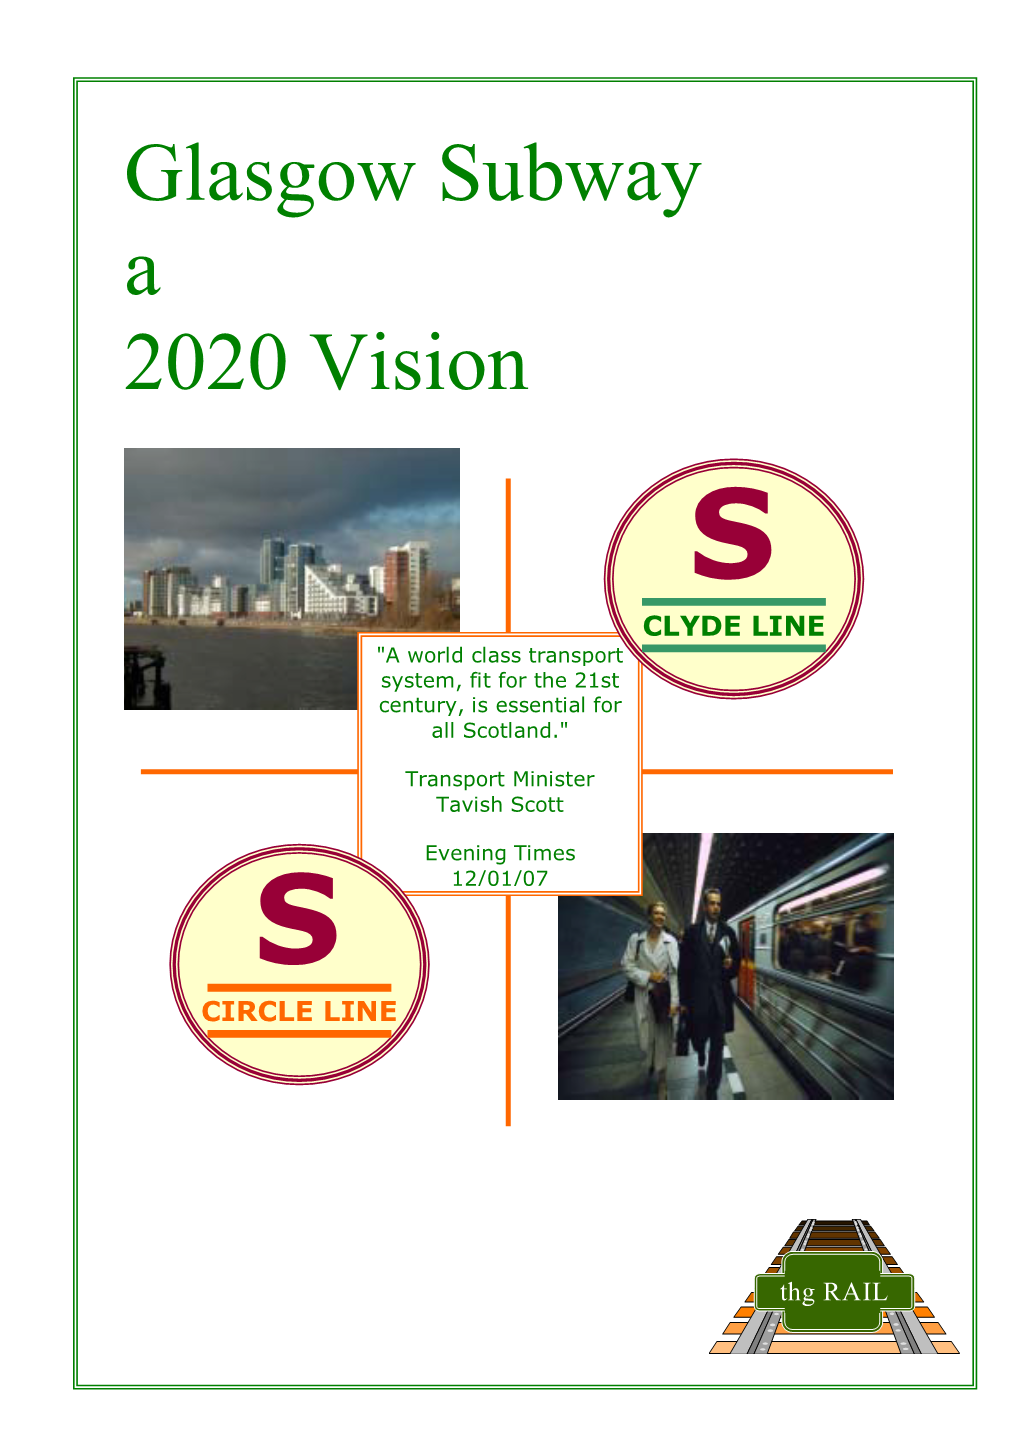 Glasgow Subway a 2020 Vision S CLYDE LINE "A World Class Transport System, Fit for the 21St Century, Is Essential for All Scotland."